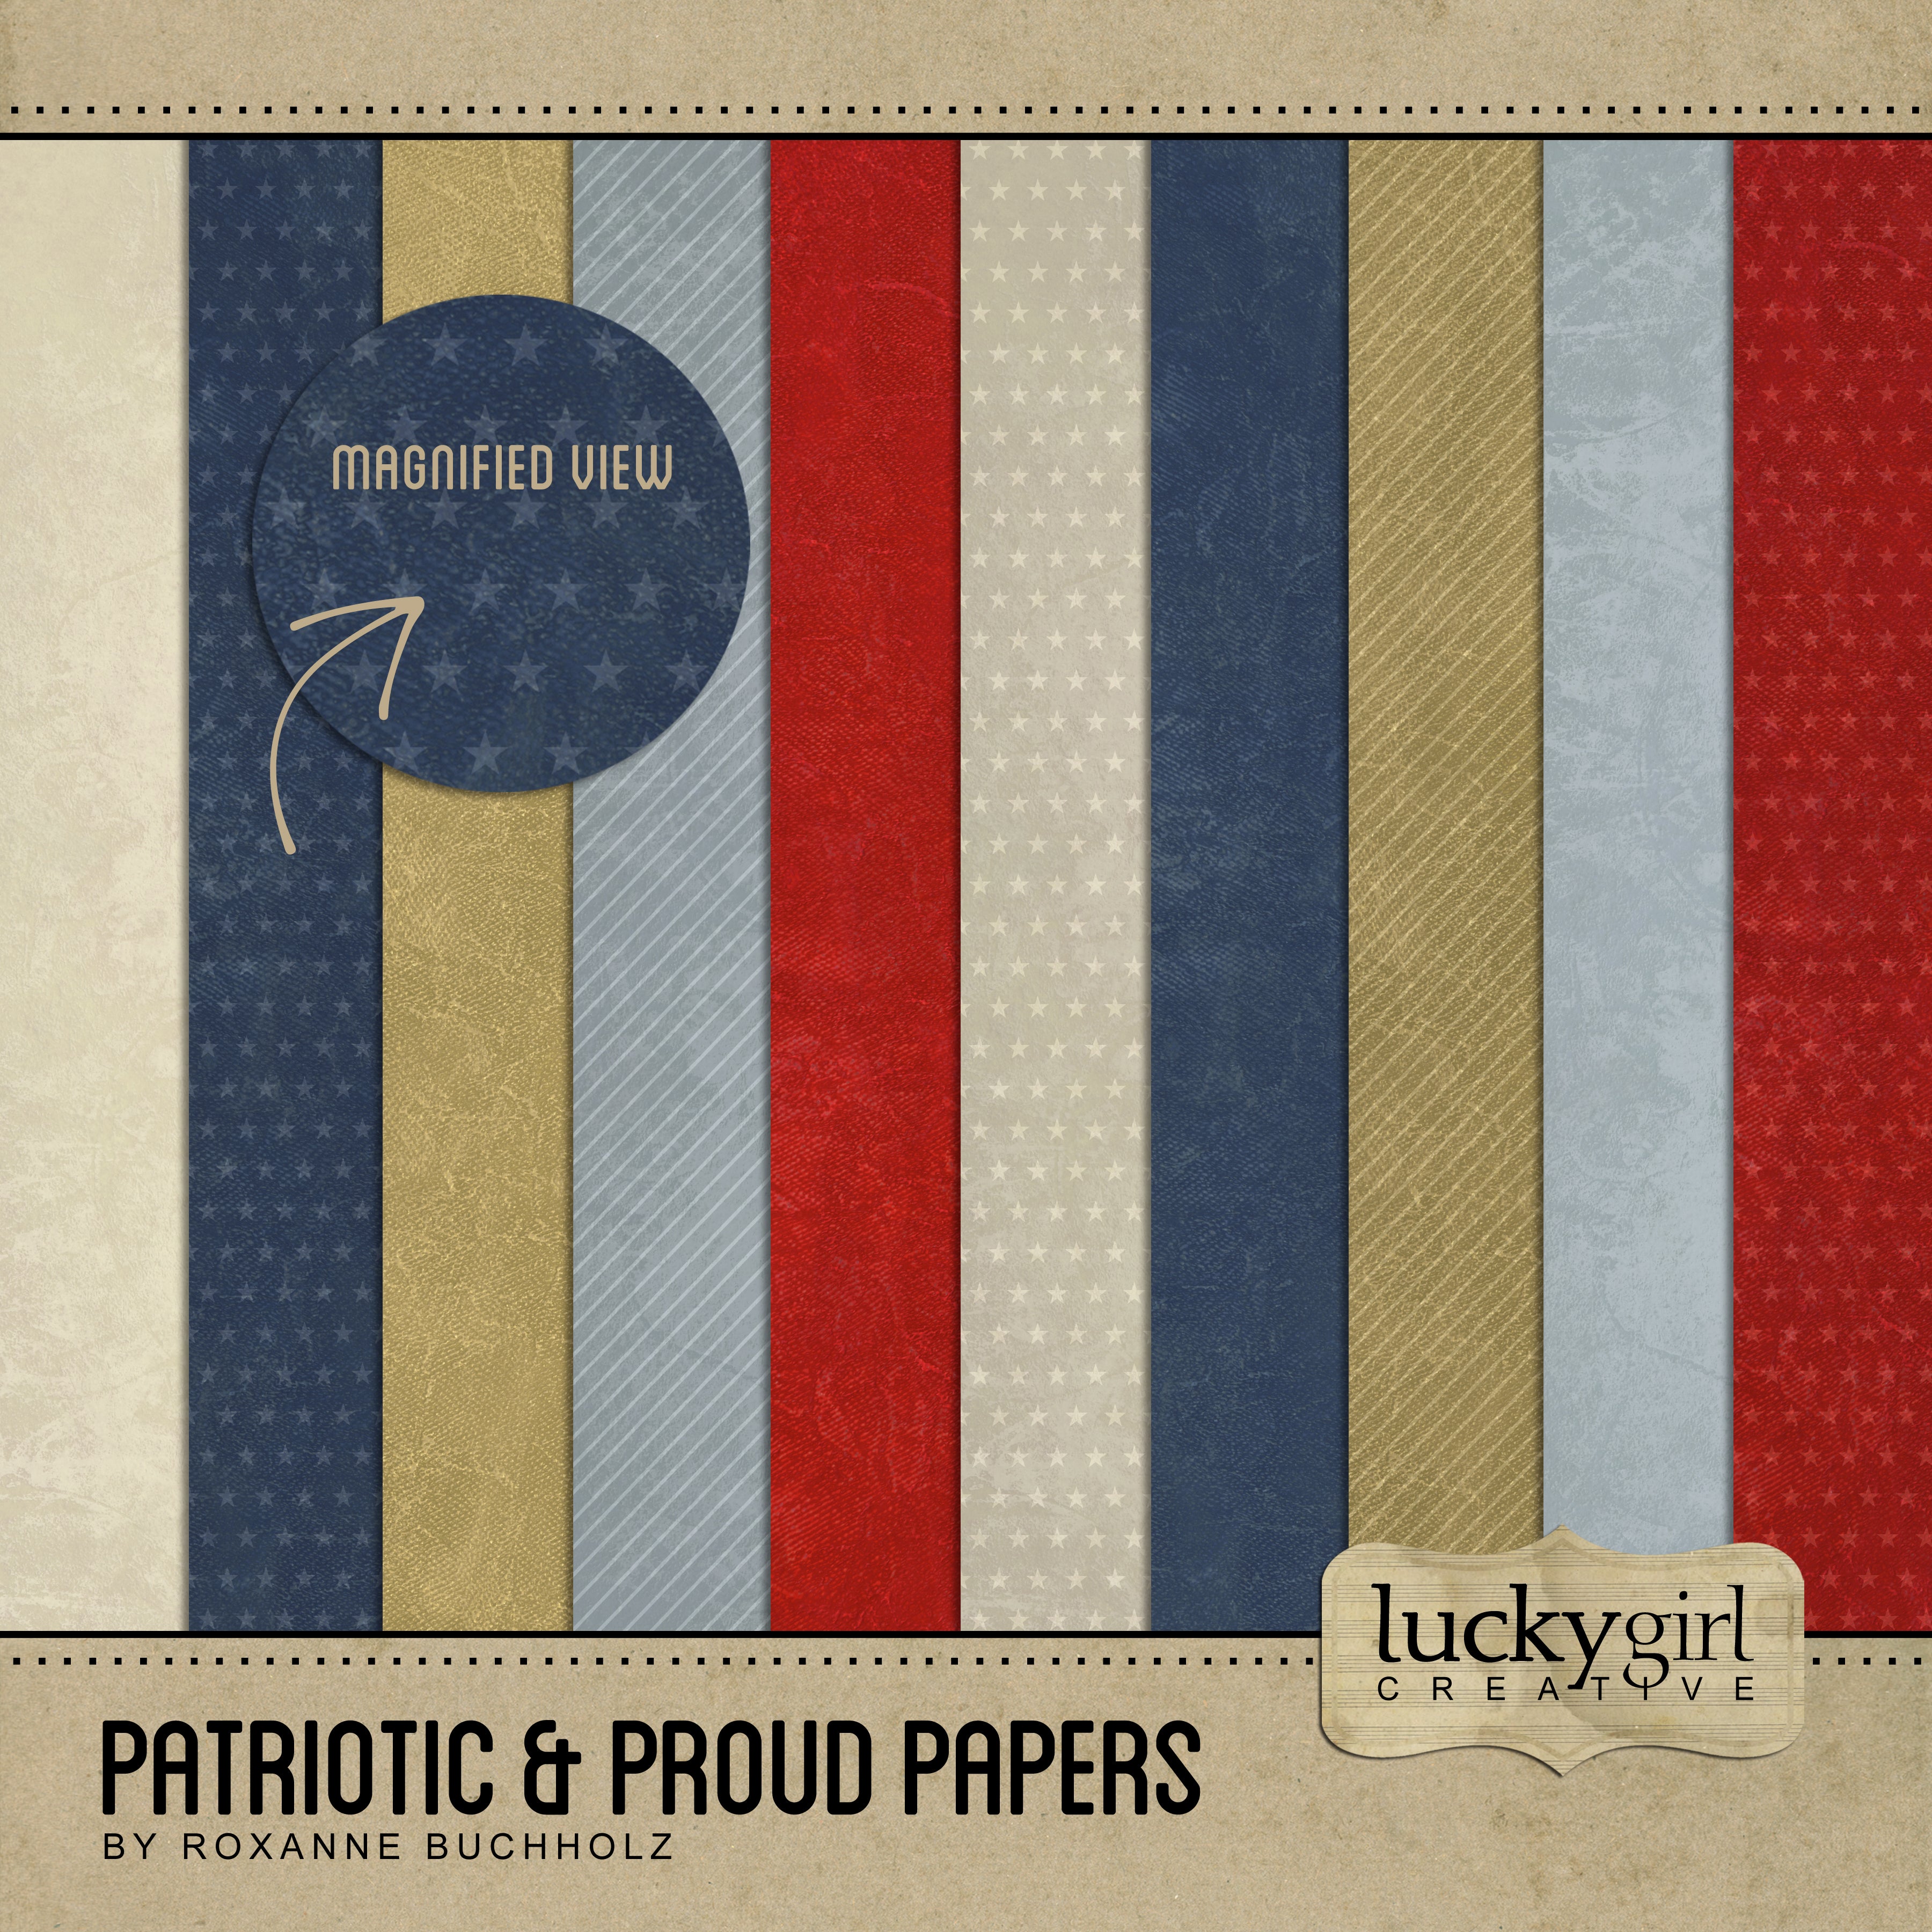 Patriotic and Proud is what you'll feel when you use this digital art kit to accent your Fourth of July and Independence Day activities or your right to vote in the United States election! Filled with vintage inspired digital art papers featuring subtle textures and patterns, some with stars and some with stripes, just right for celebrating America's independence.